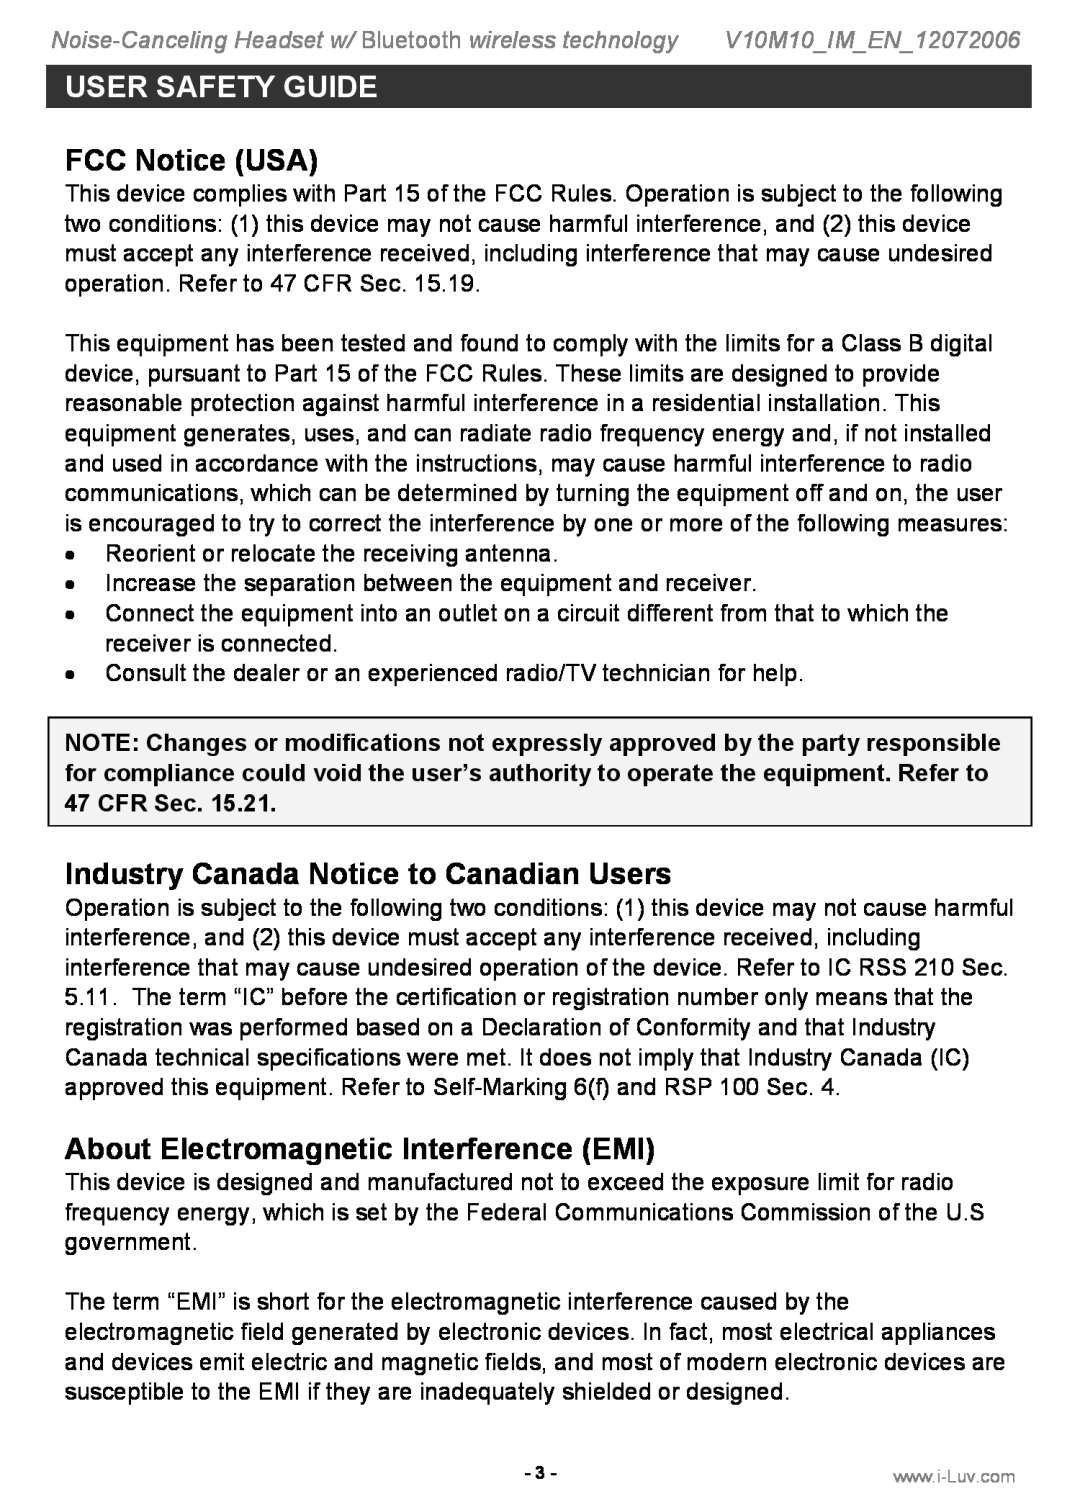 Iluv i913 FCC Notice USA, Industry Canada Notice to Canadian Users, About Electromagnetic Interference EMI 